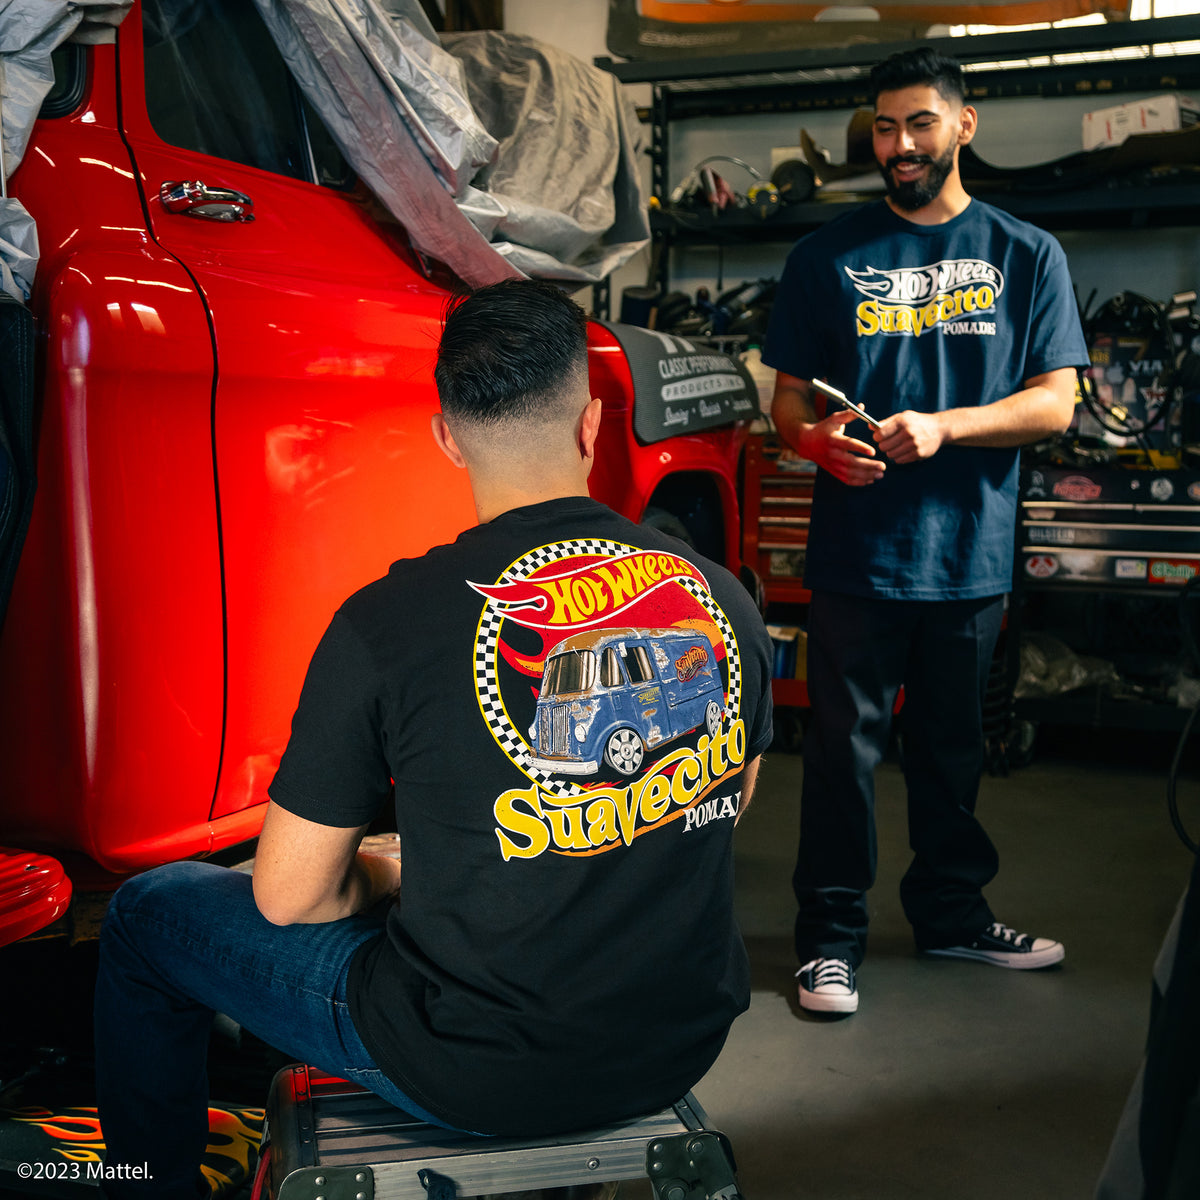 hot wheels X suavecito delivery van tee and firme car tee